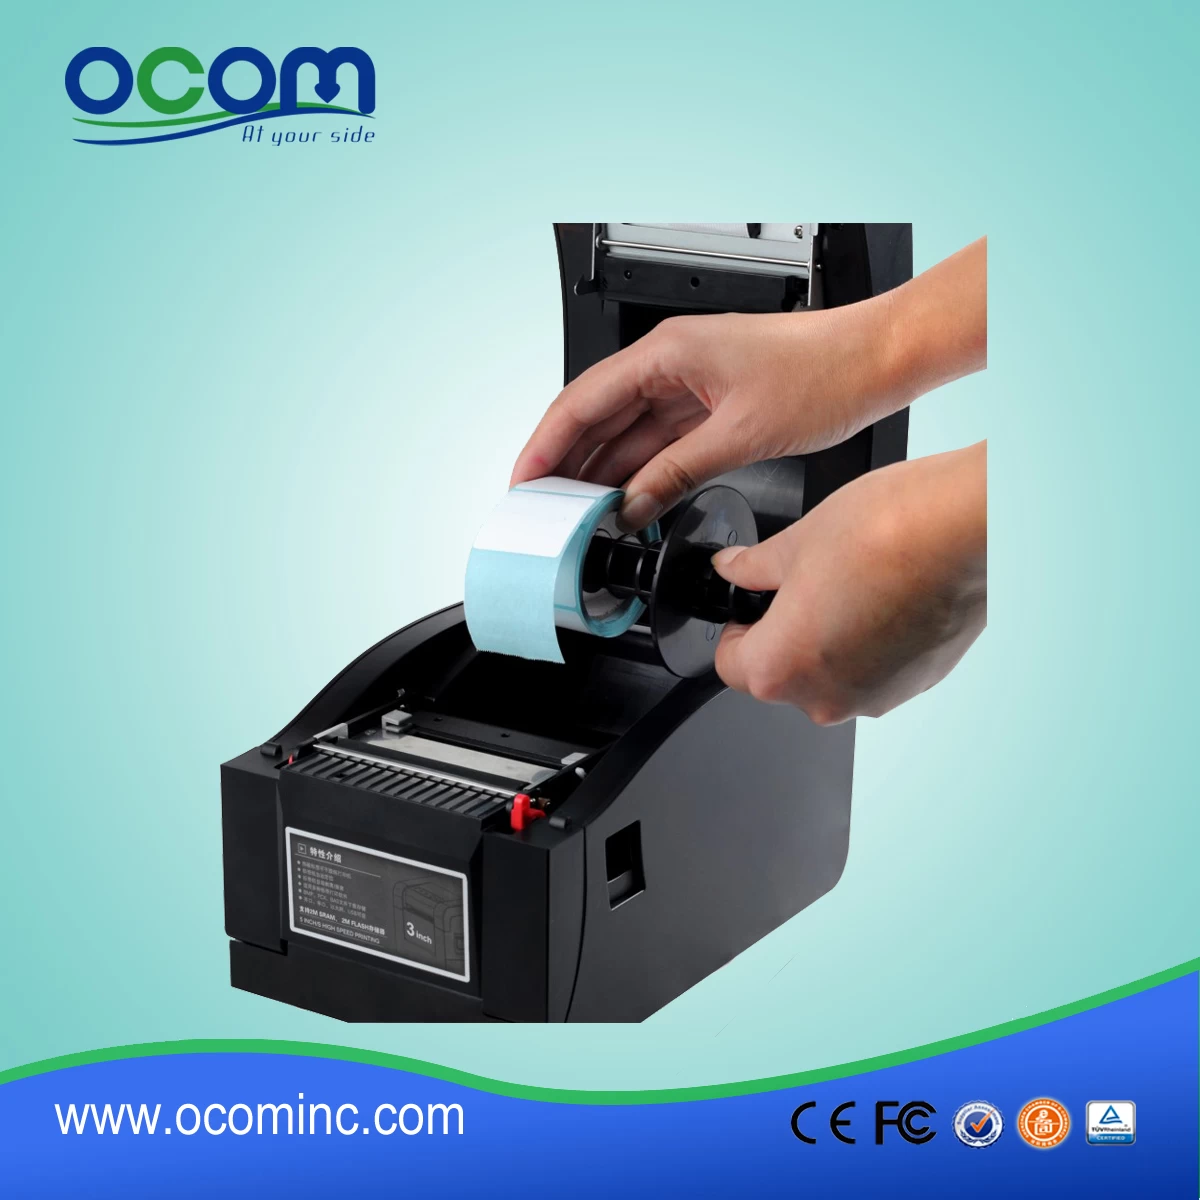 OCBP-005: Cost Competitive Airprint direct thermal barcode label printer